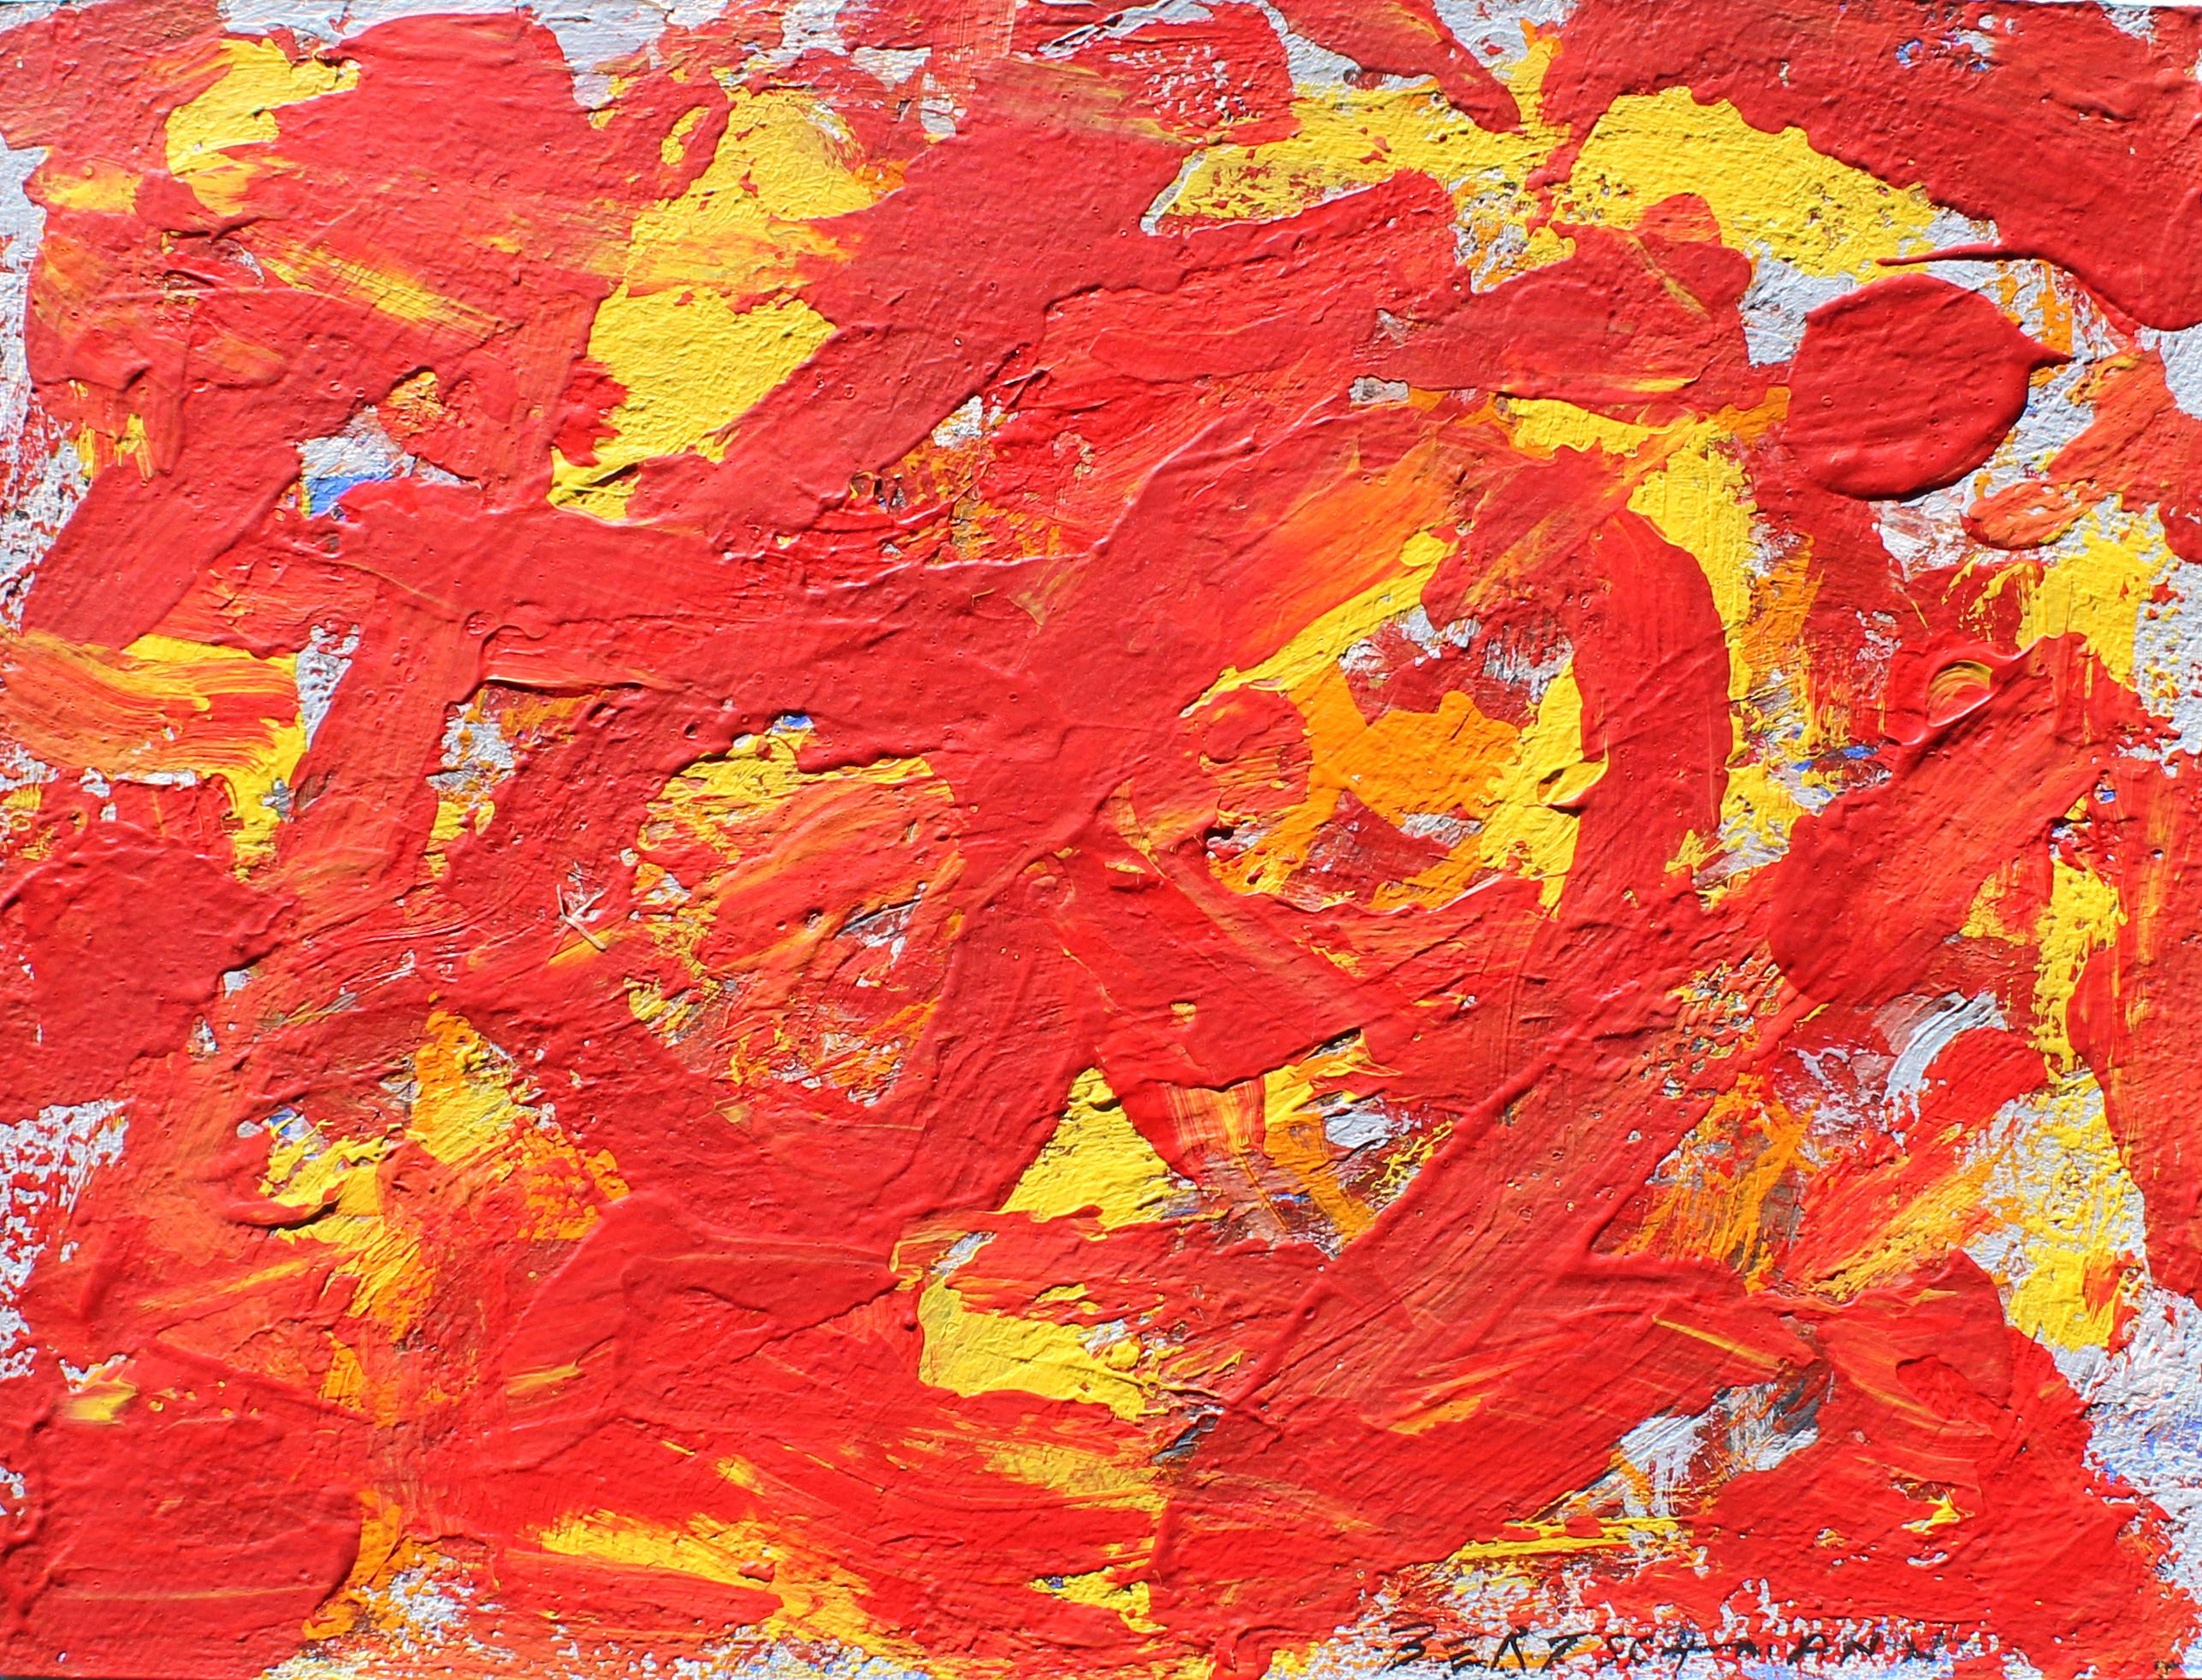 Untitled, archived no. 46 - Painting by Harry Bertschmann